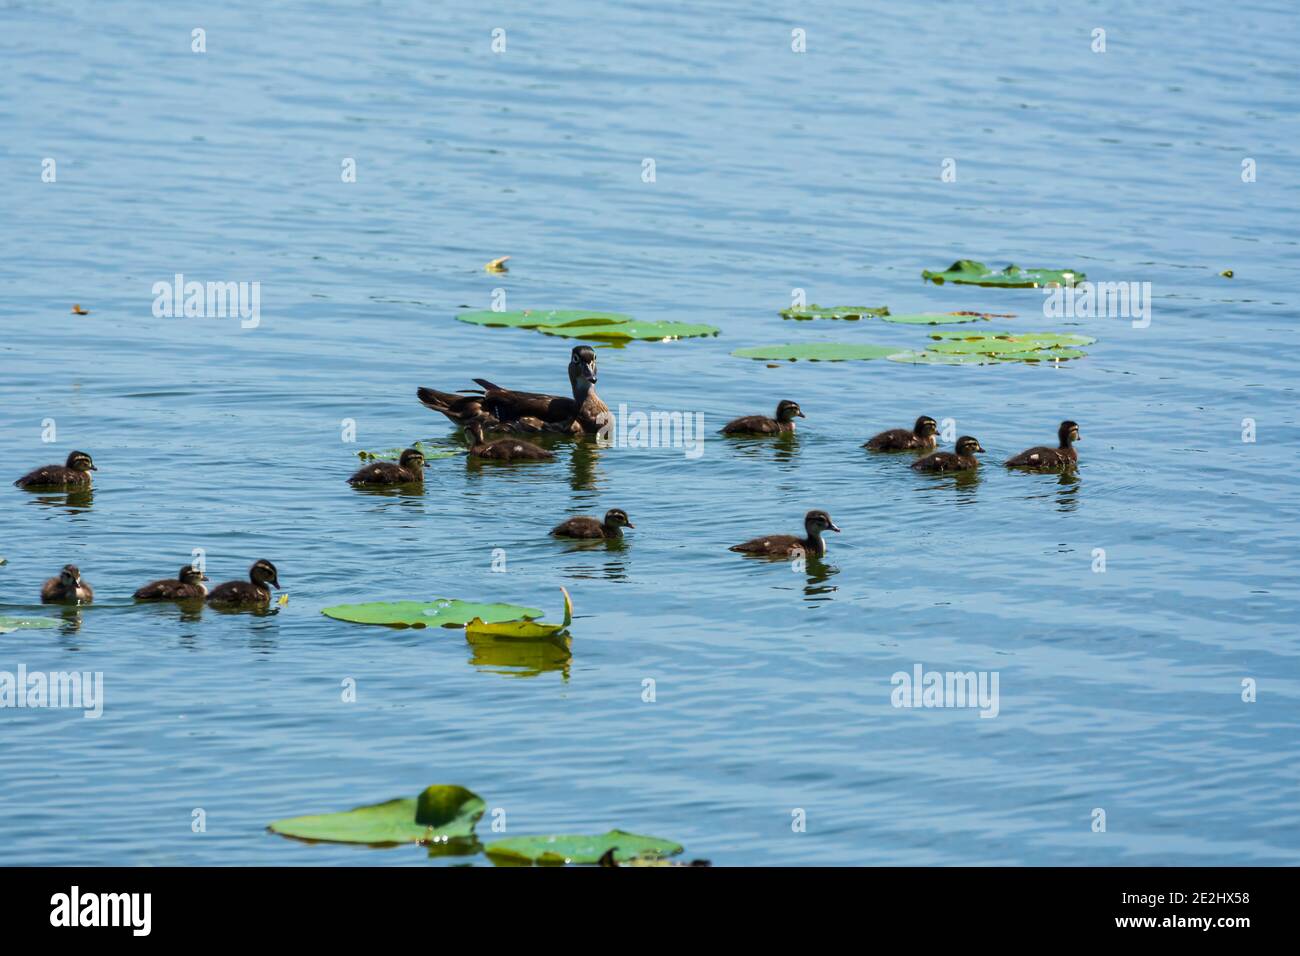 A mother duck and her ducklings calmly swim between the lily pads on a calm Central Florida lake on a beautiful summer day. Stock Photo